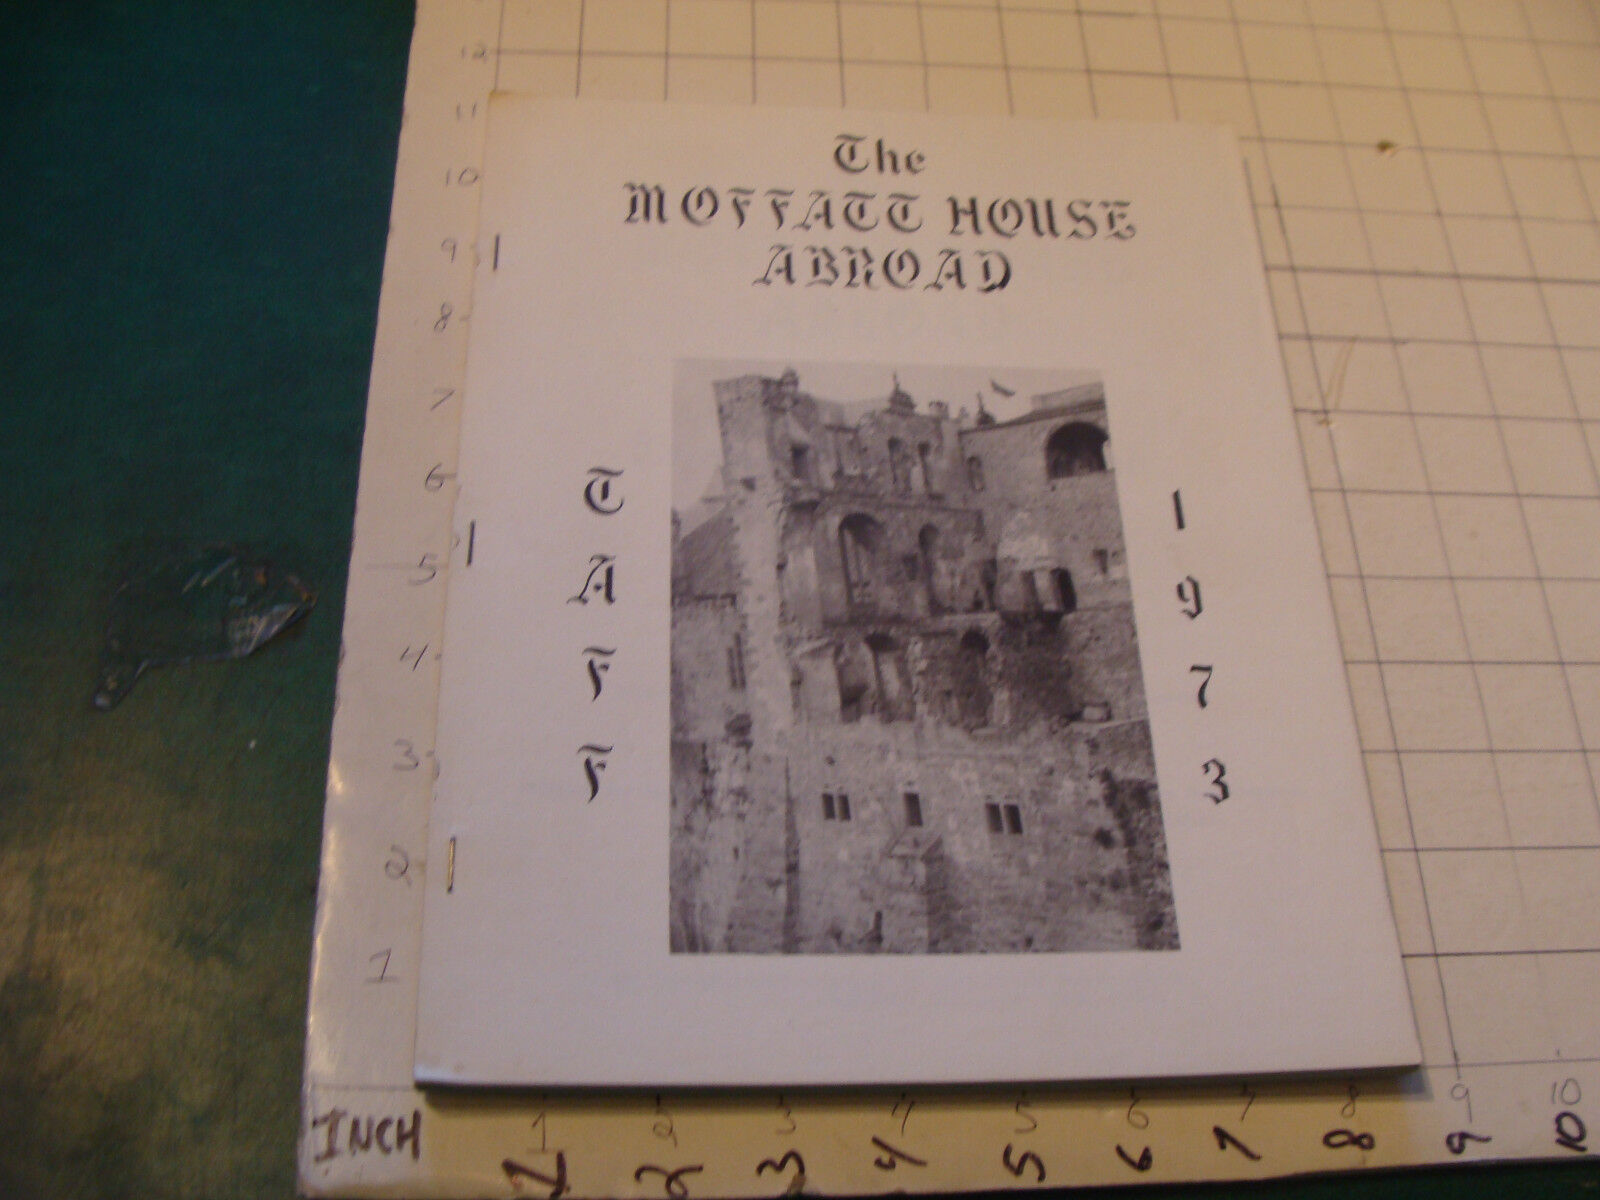  Vintage High Grade: THE MOFFATT HOUSE ABROAD 1973, 64 pages plus Photo pages